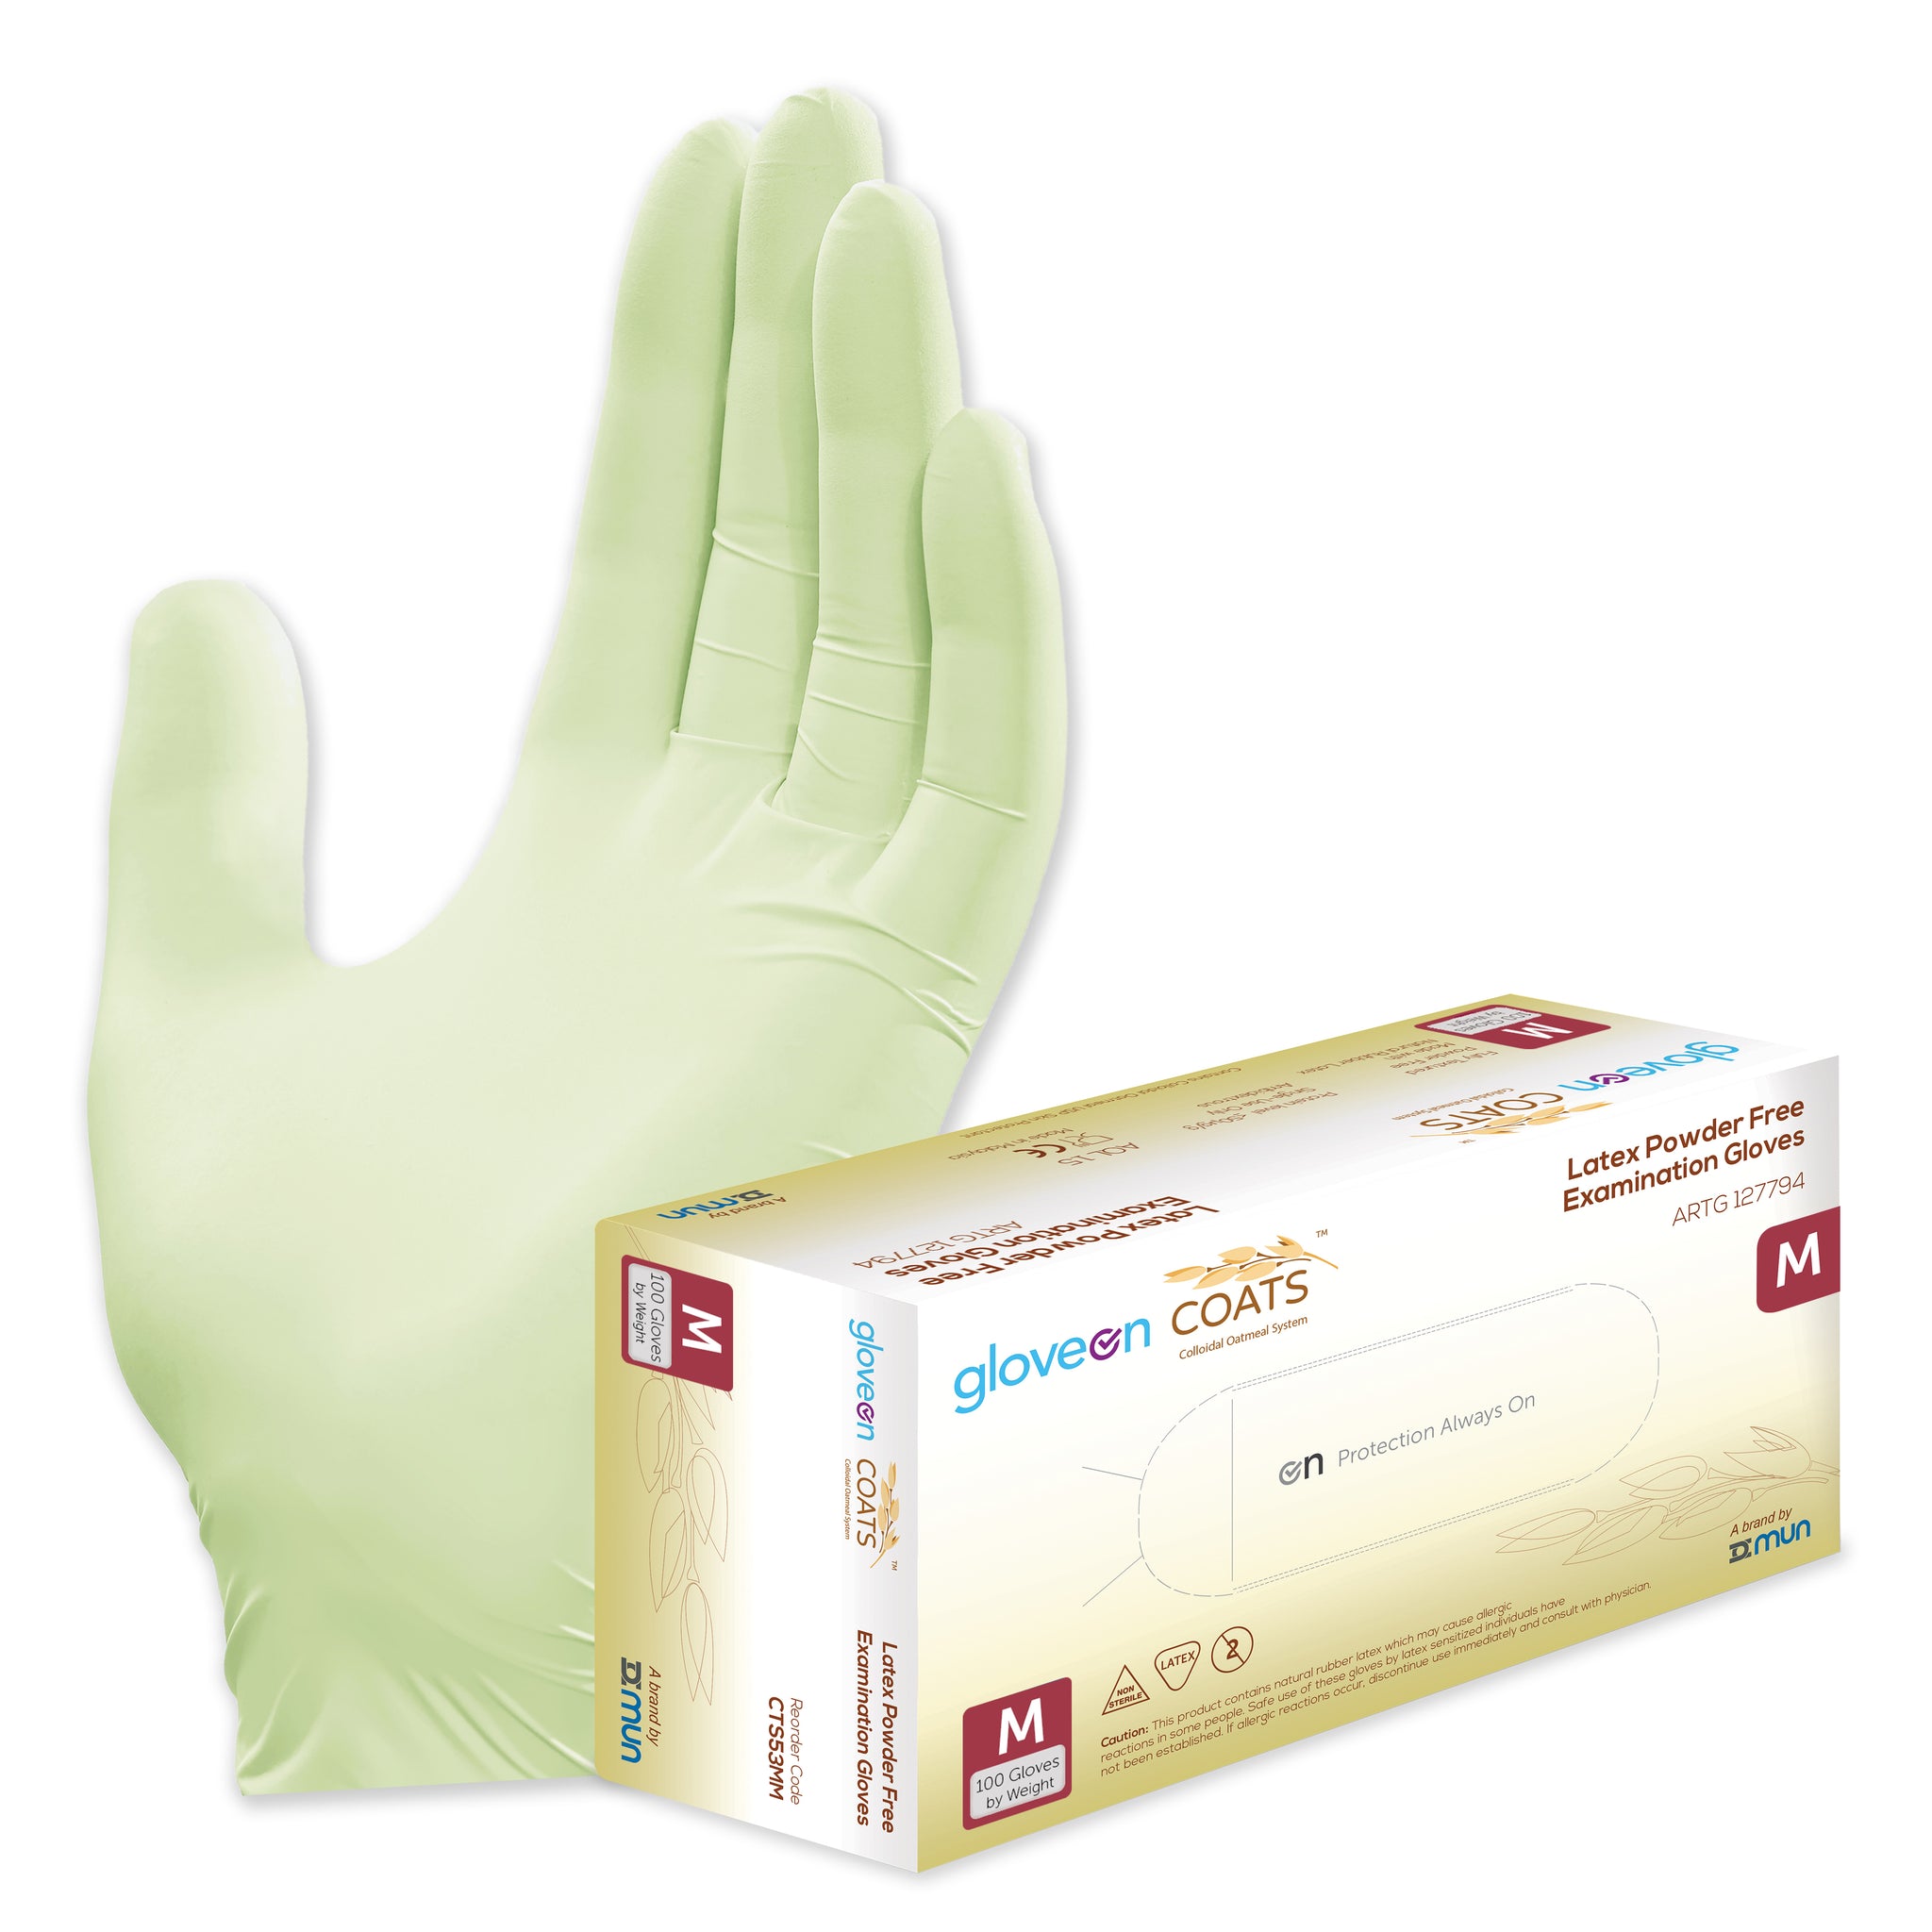 Latex Exam Gloves with Colloidal Oatmeal System, Powder Free, Non-Sterile, Fully Textured, Colloidal Oats Coated, Standard Cuff, Lime Green - Box of 100, M